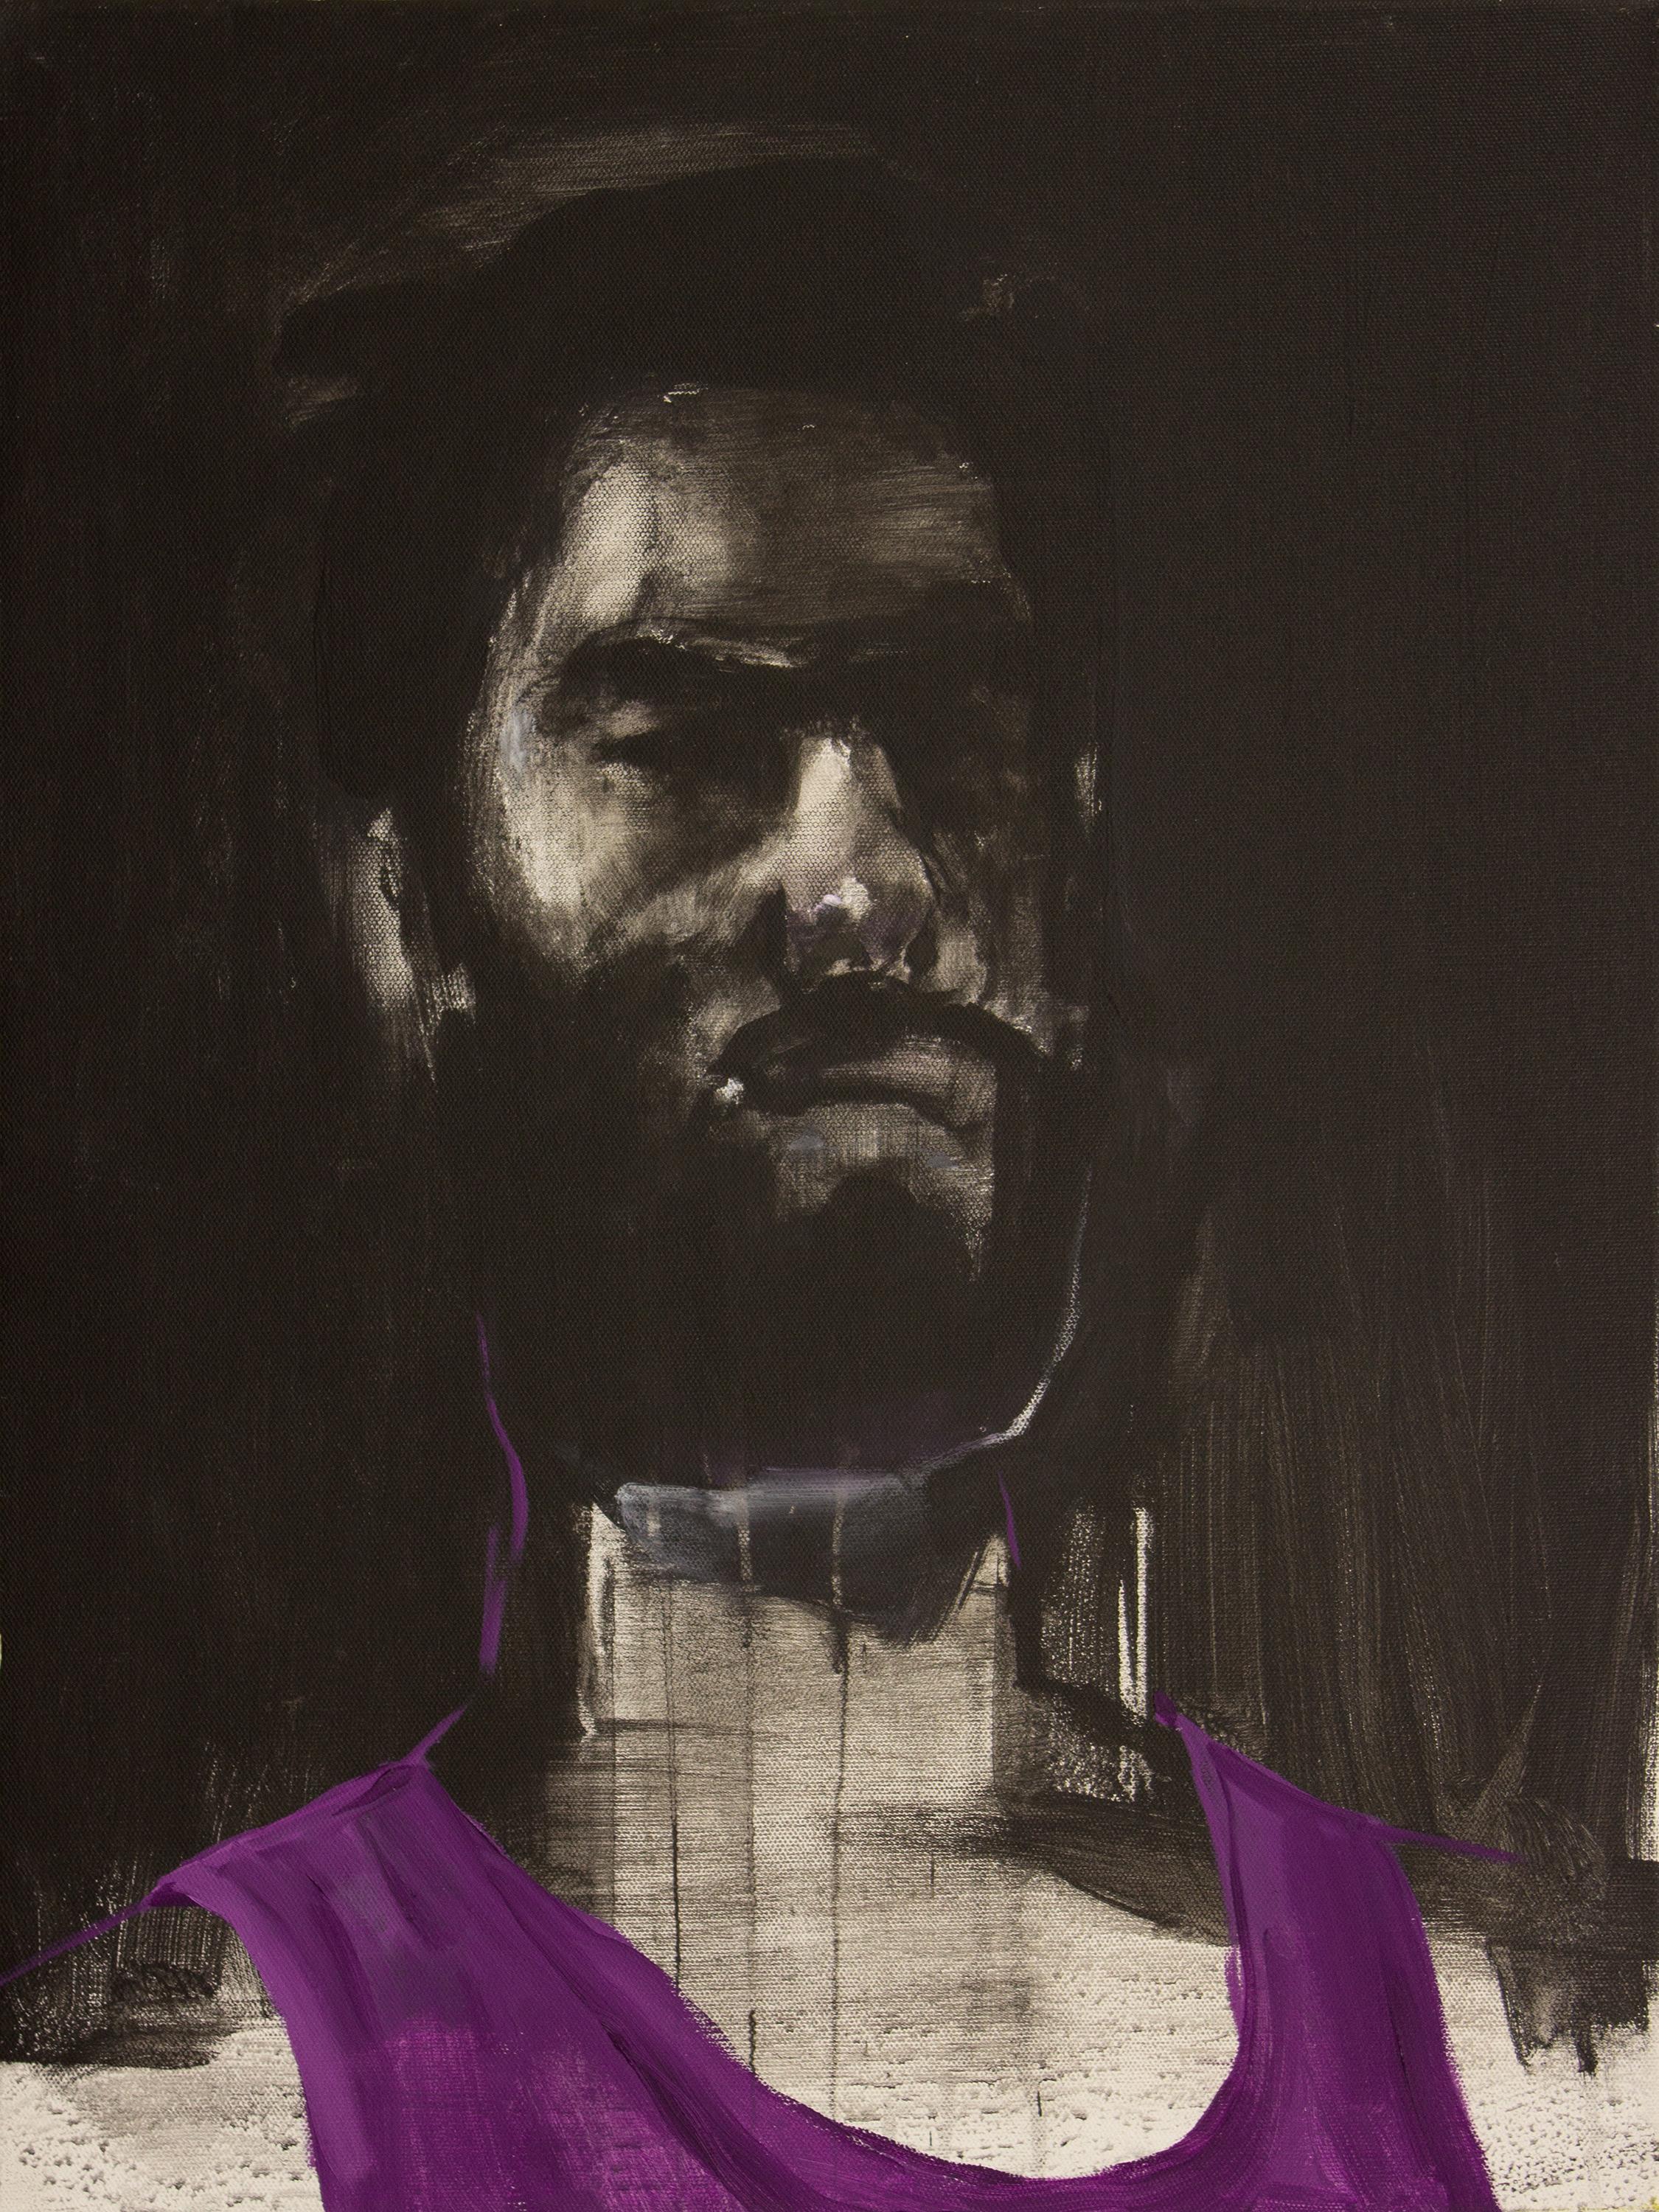 This work is Esteban Ocampo-Giraldo, Selfie Painted With Purple Tank Top, 2016, oil on canvas, 24 x 18 inches. It is part of his series of dynamic self portraits, aptly titled "Selfies." Painted with verve in one sitting and without revision, these